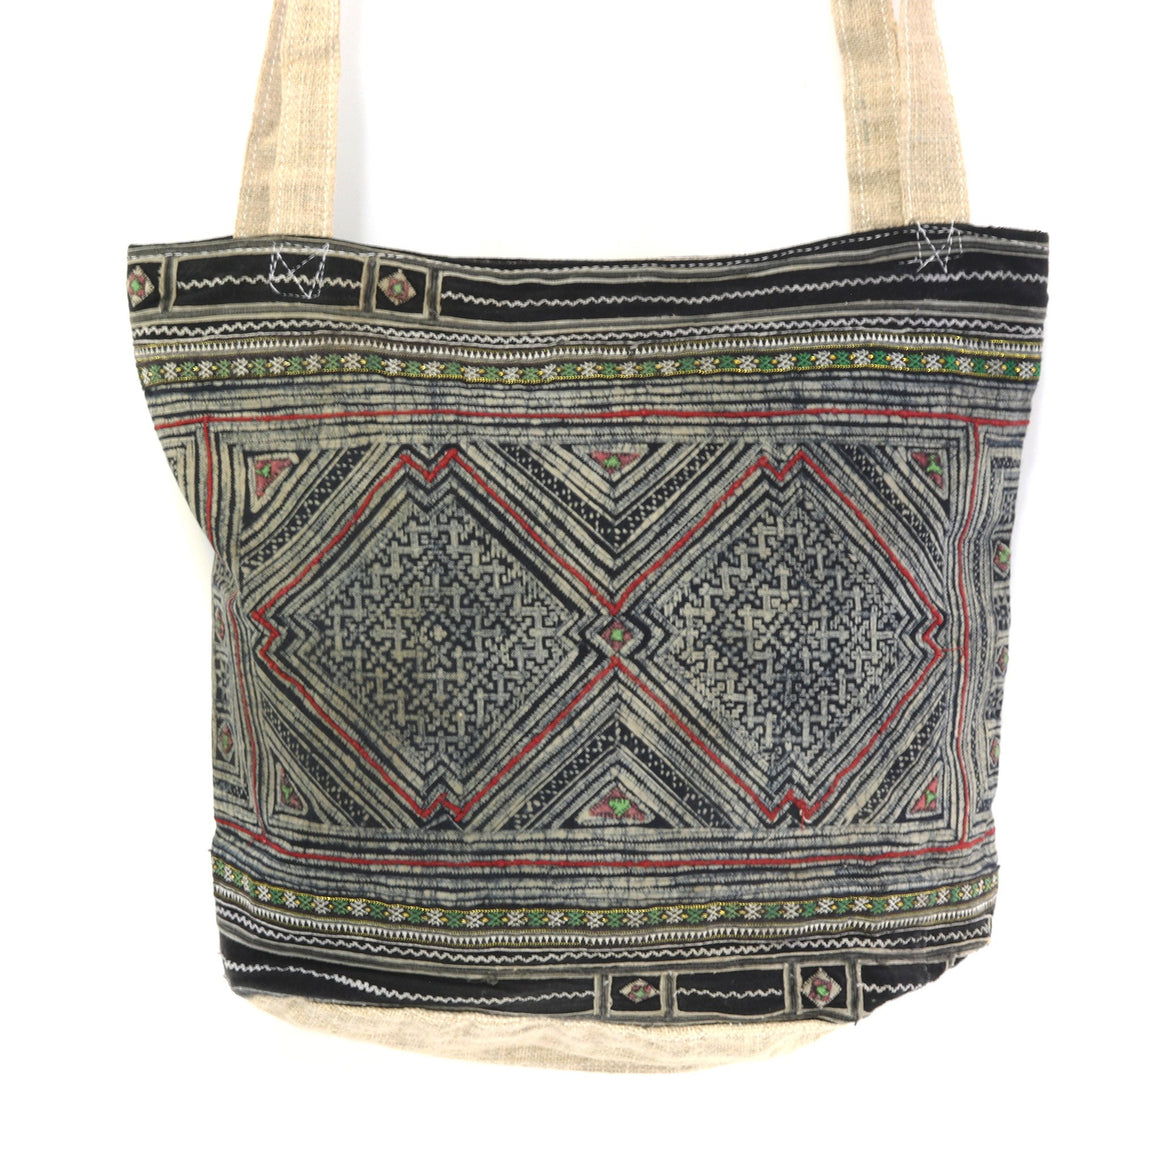 HMONG HEMP BOHO EMBROIDERED VINTAGE RECYCLED SHOULDER BAG ~ BATIK TRIANGLES BAGS & PURSES ZENZOEY JEWELRY & ACCESSORIES 